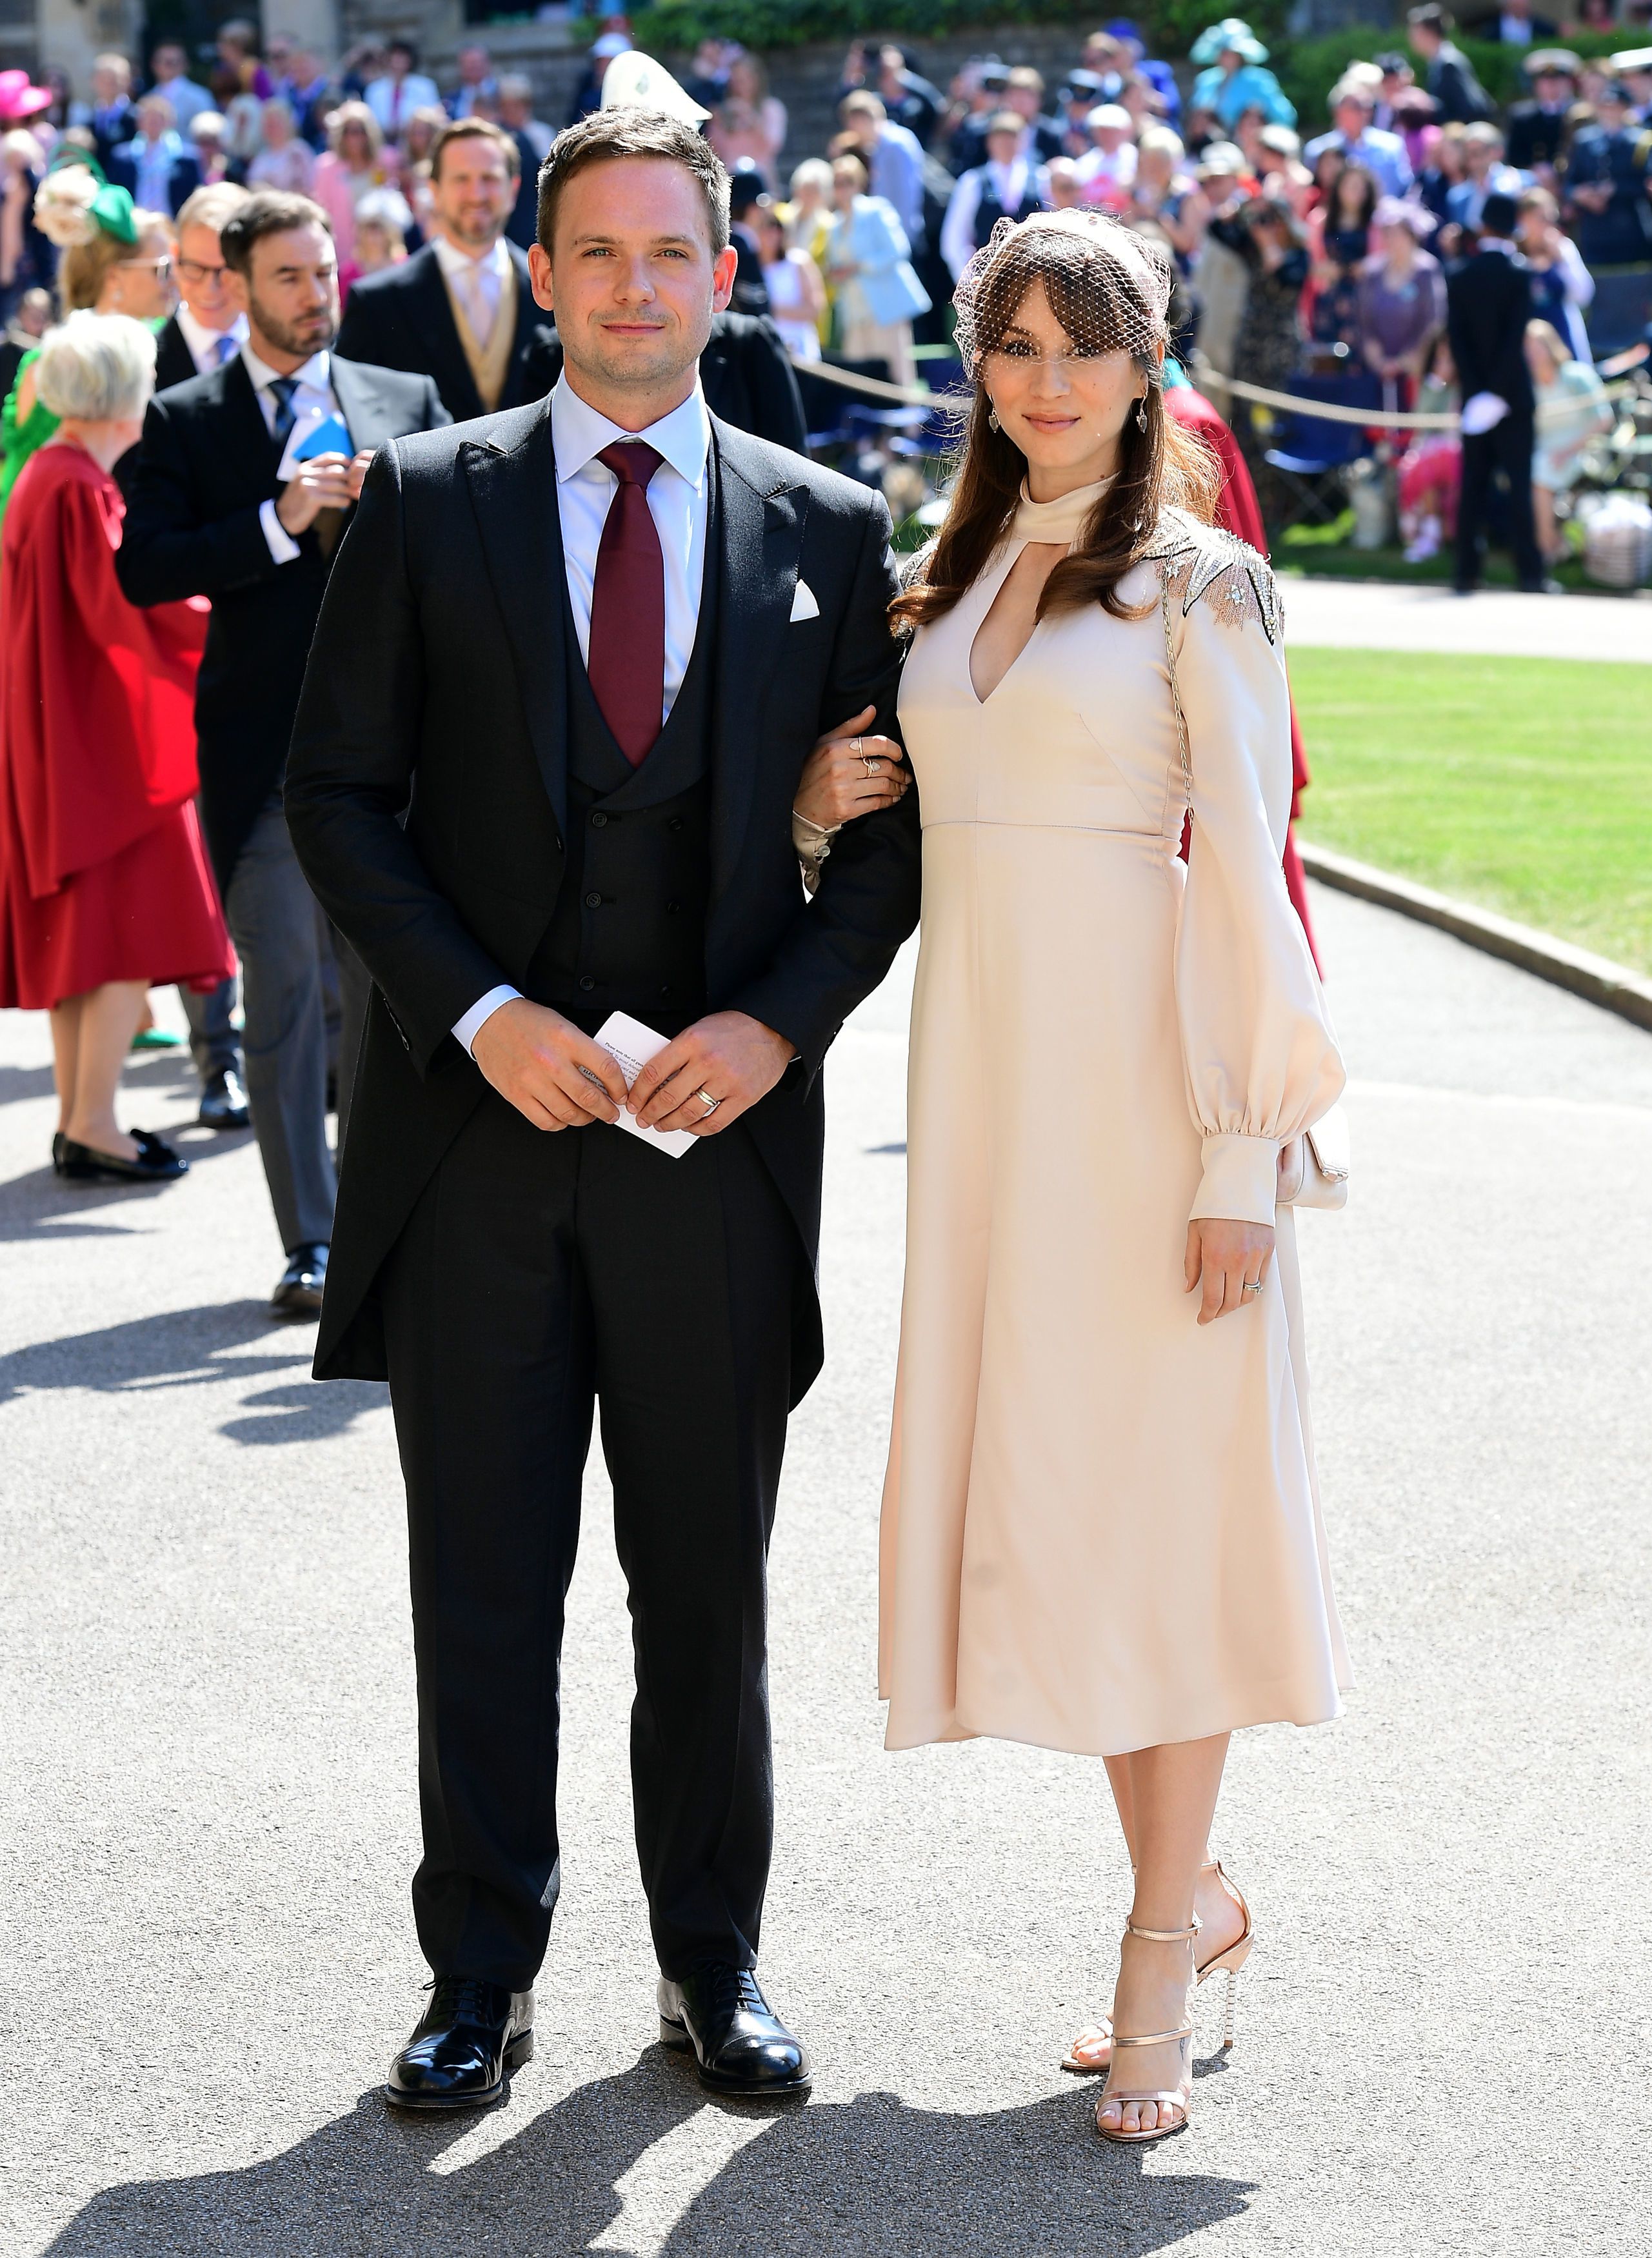 Royal Family Wedding Guest Outfit Inspiration - What Royals like